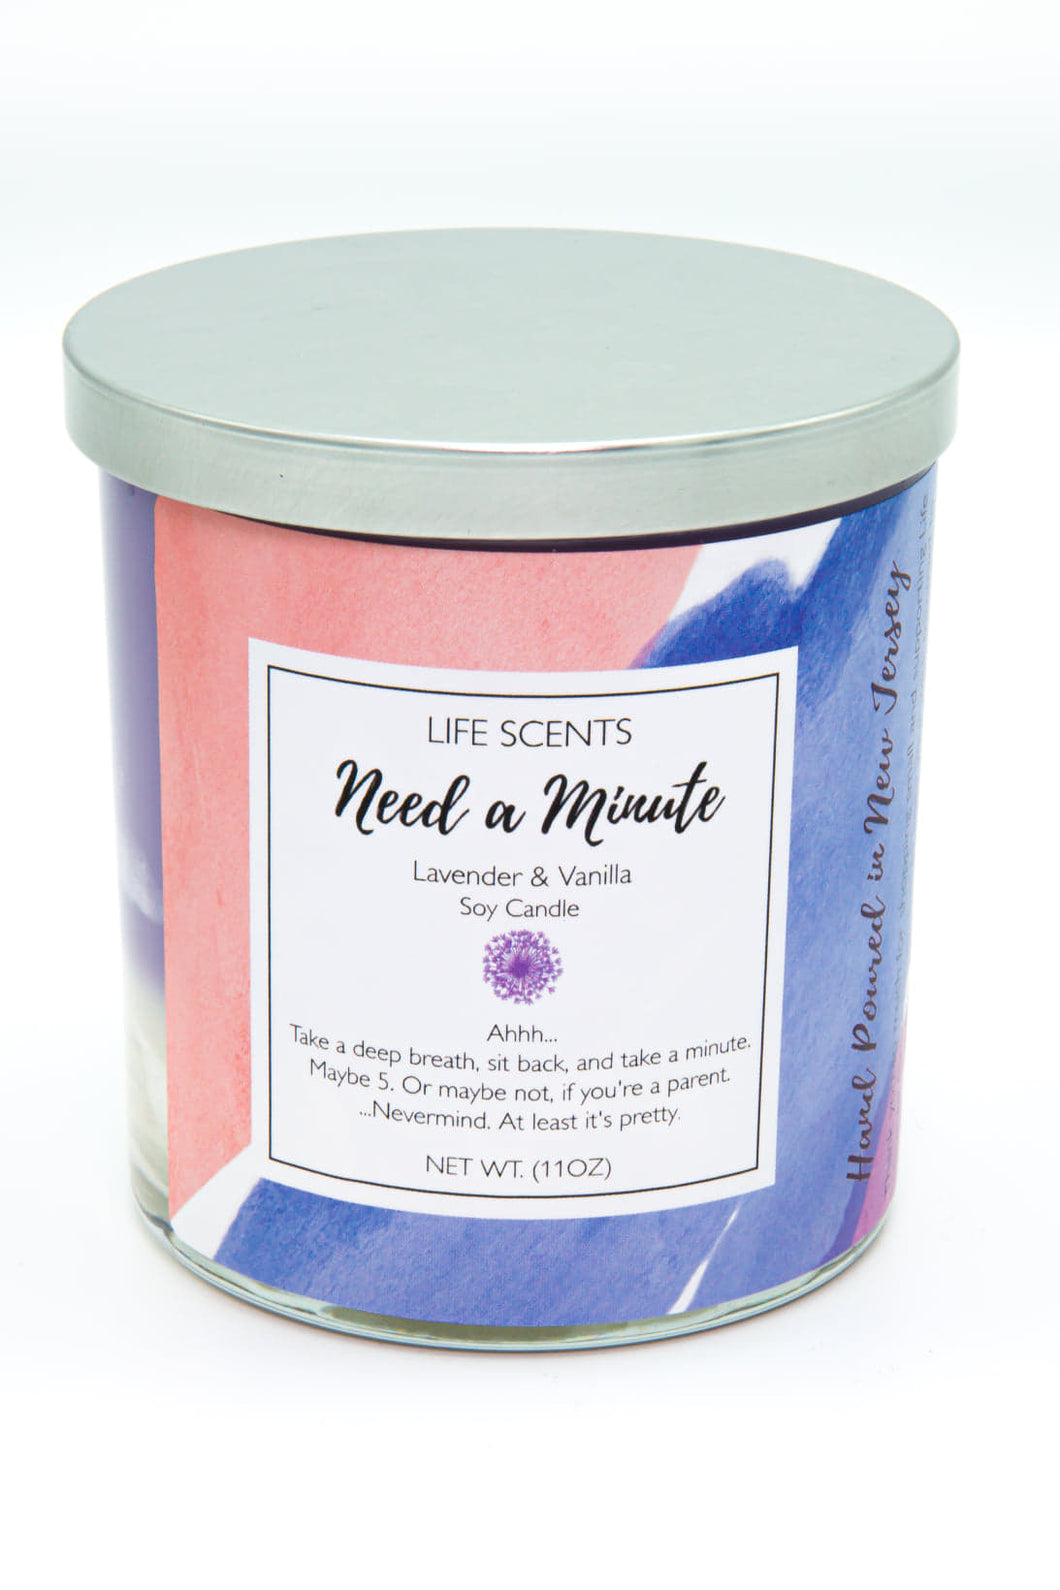 Need a Minute - Lavender & Vanilla Scented Candle